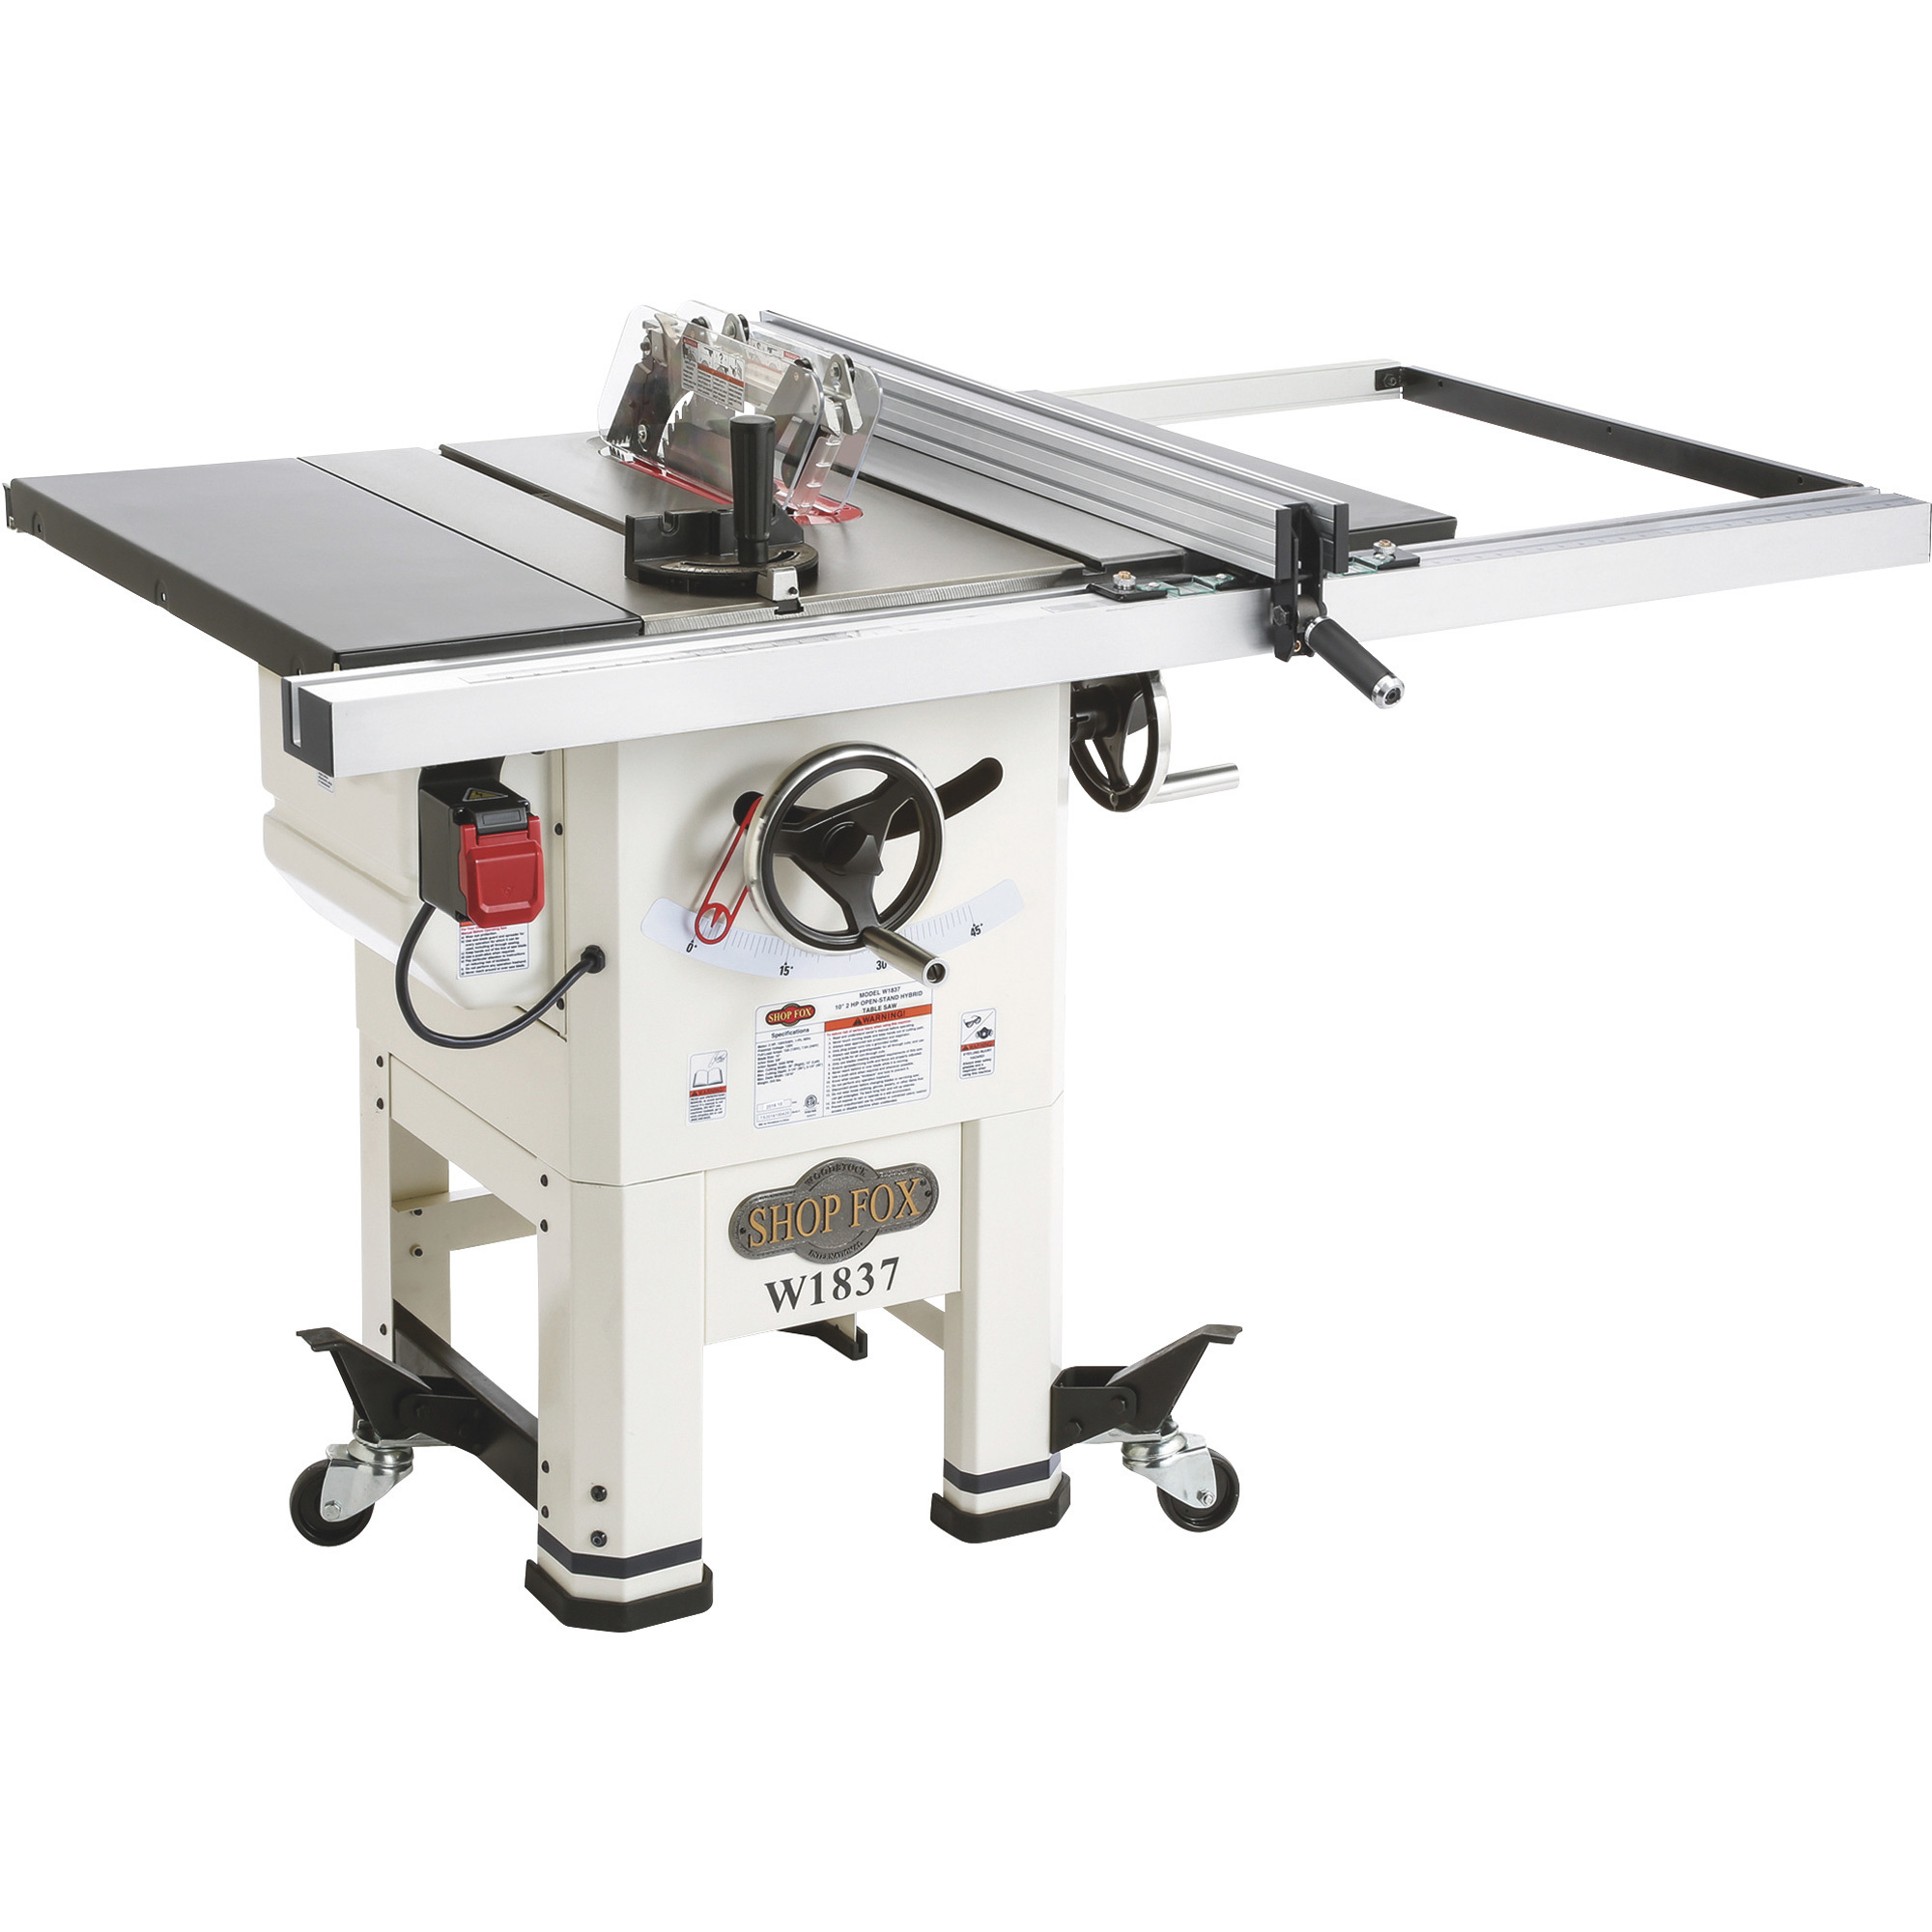 Shop Fox Hybrid Open Stand 10Inch Table Saw, 2 HP, 120 Volts, 15 Amps, 1-Phase, Model W1837